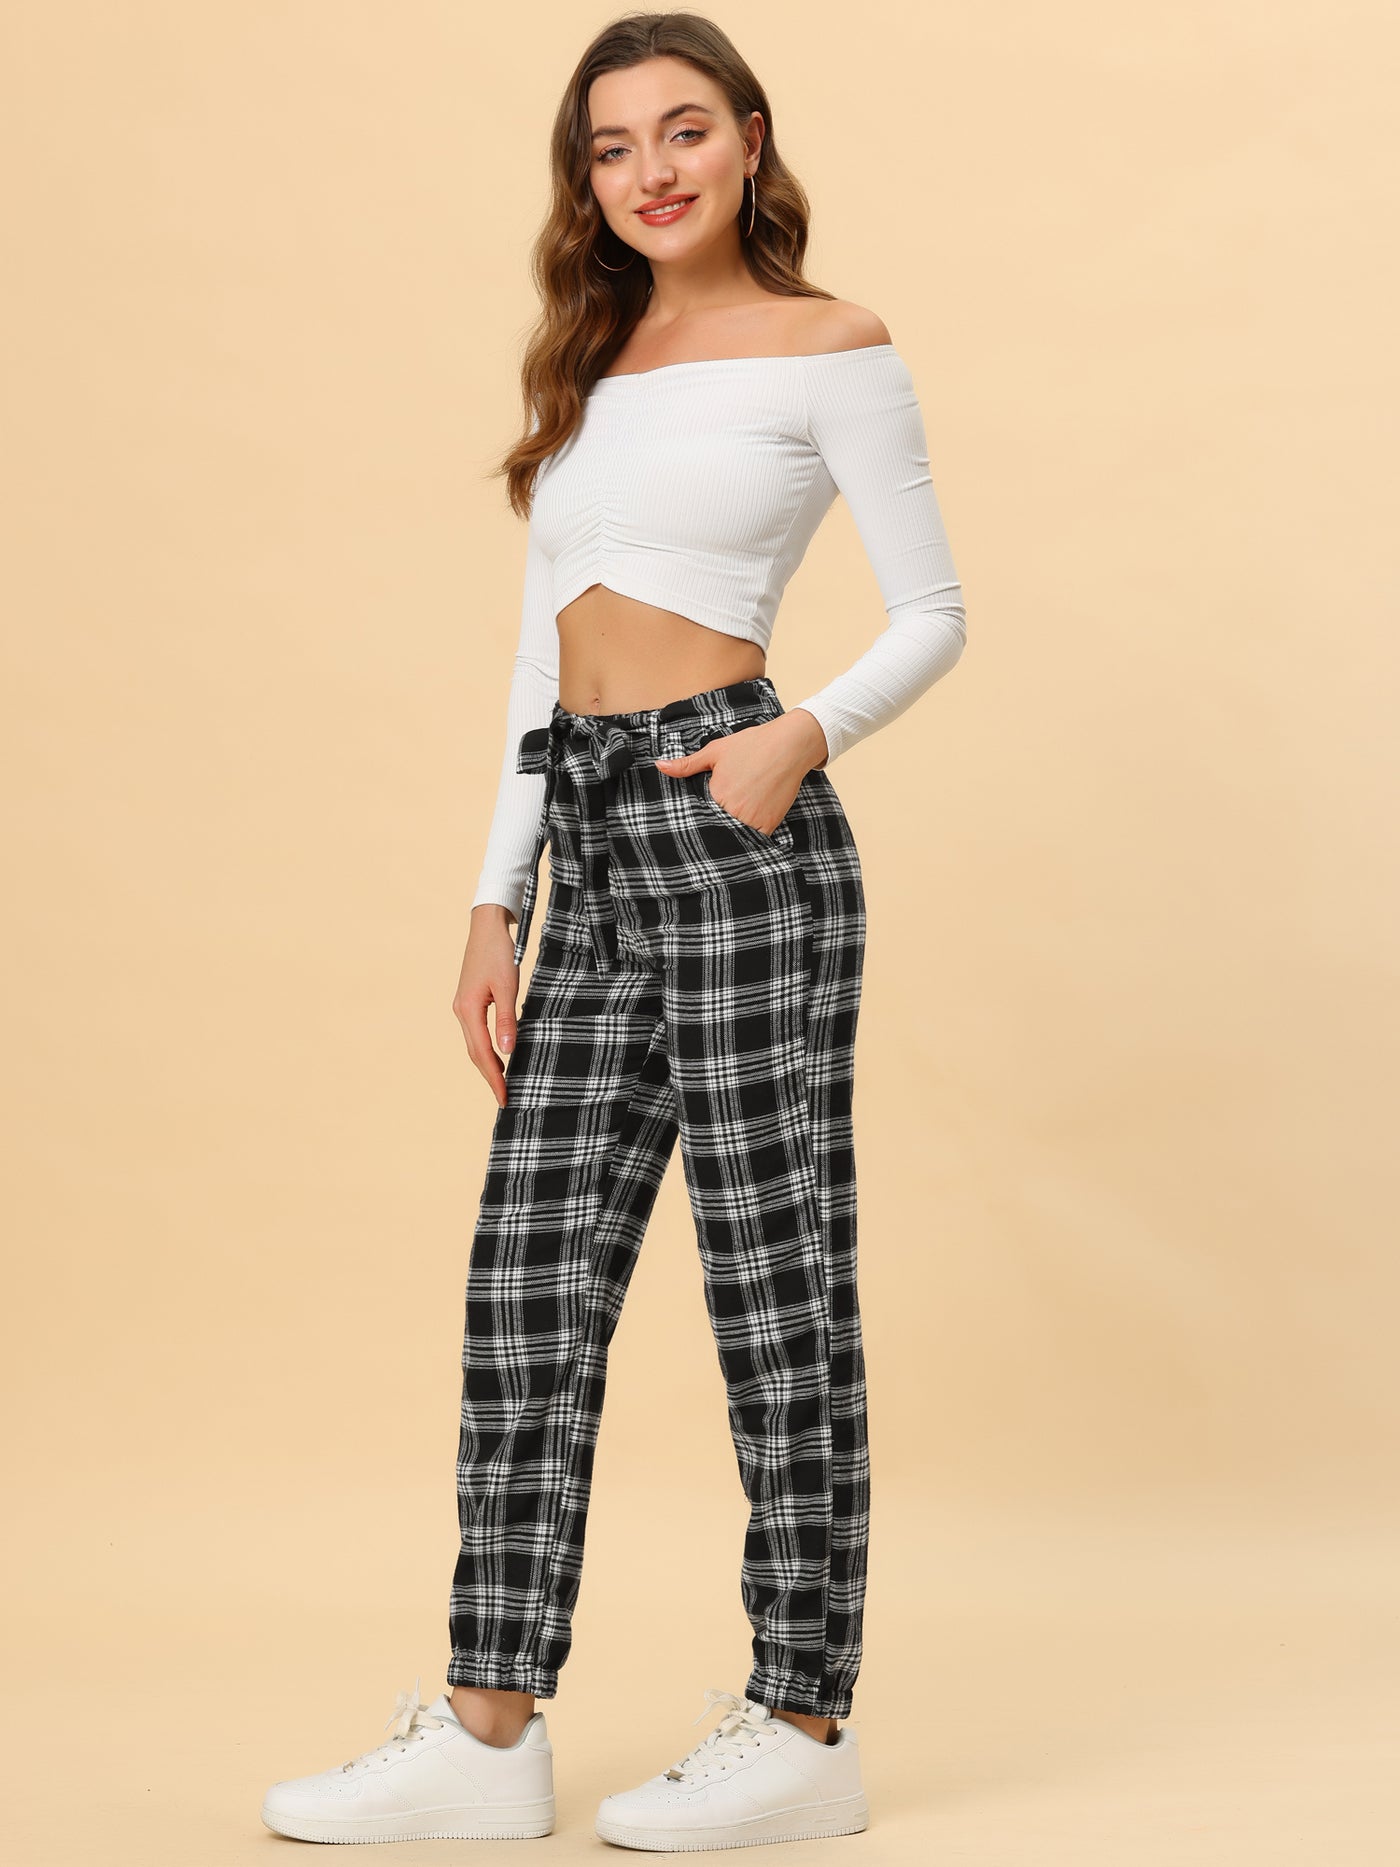 Allegra K Plaid Sweatpants Tapered Tie High Waisted Tartan Pants with Pockets